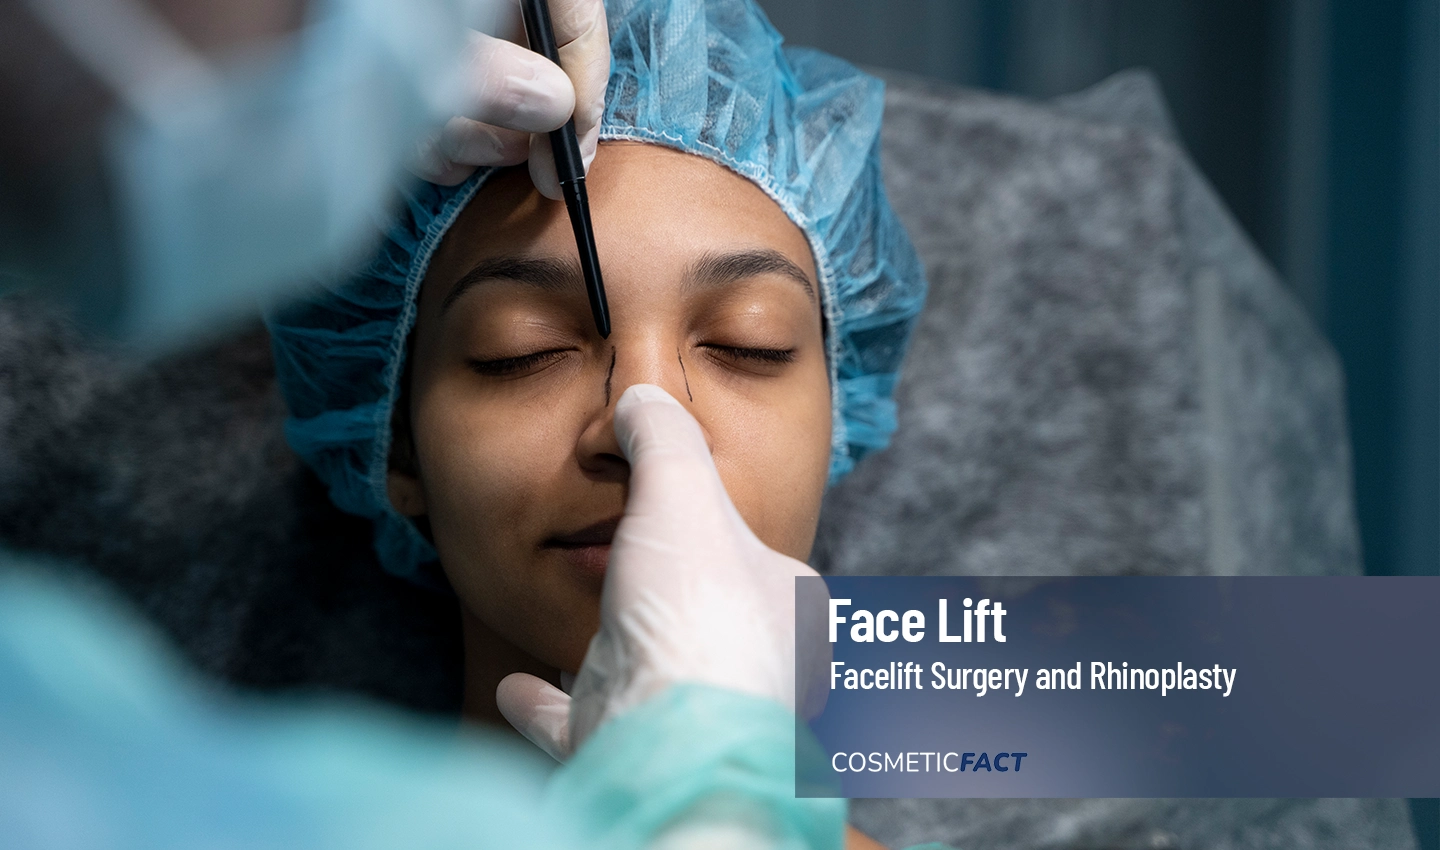 Black woman in a hospital gown preparing for a combined facelift and rhinoplasty surgery to achieve facial harmony.